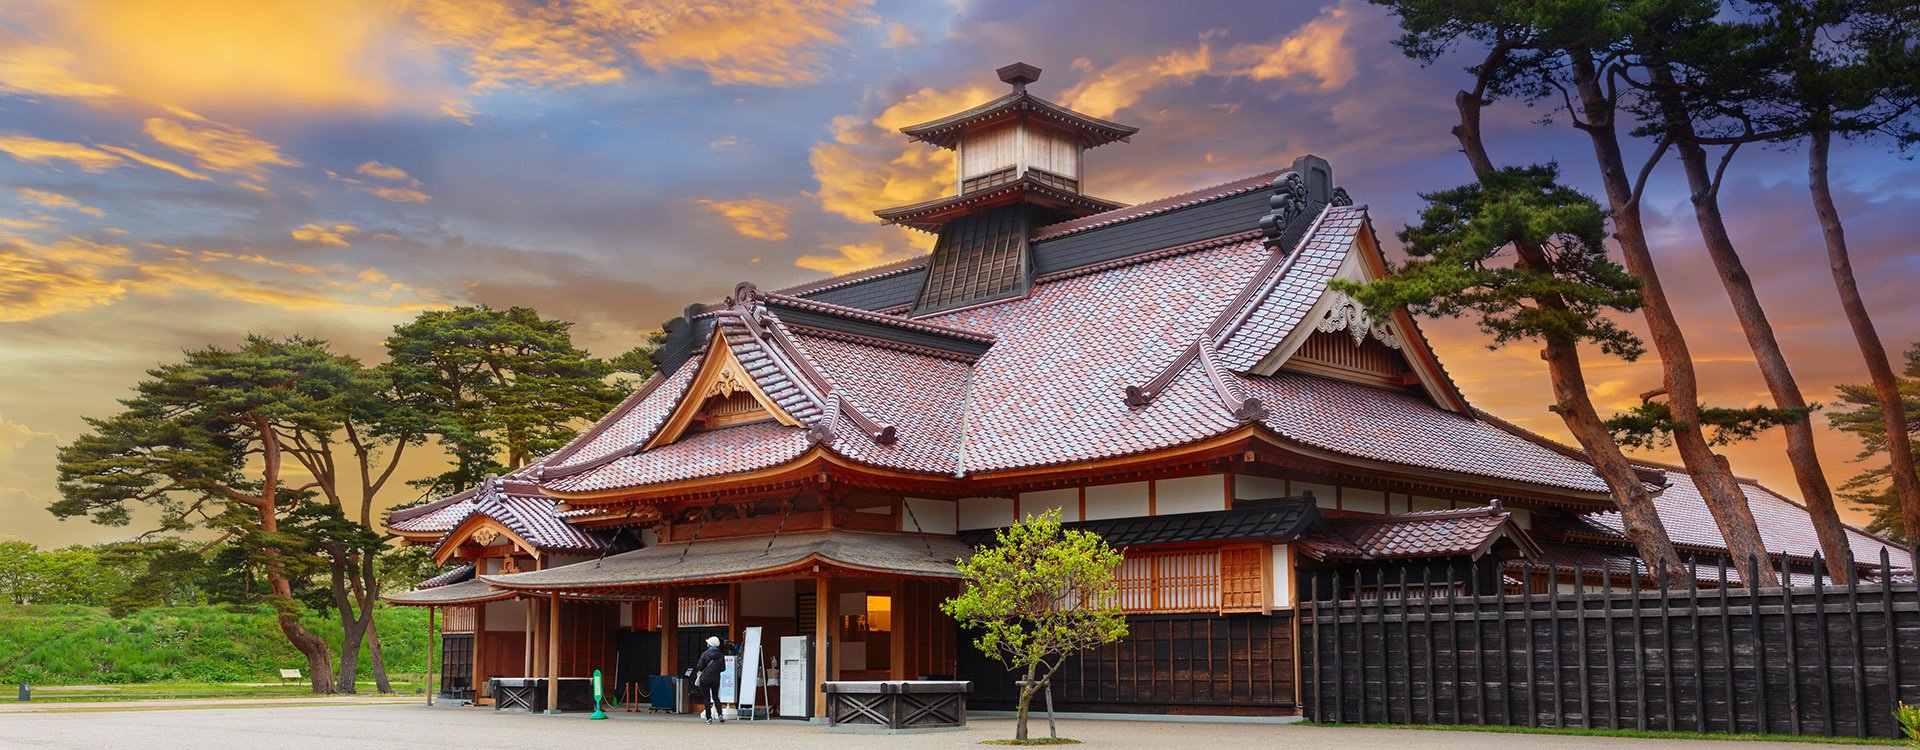 Japanese Temple in summer in Hakodate, Hokkaido, Japan at sunset time